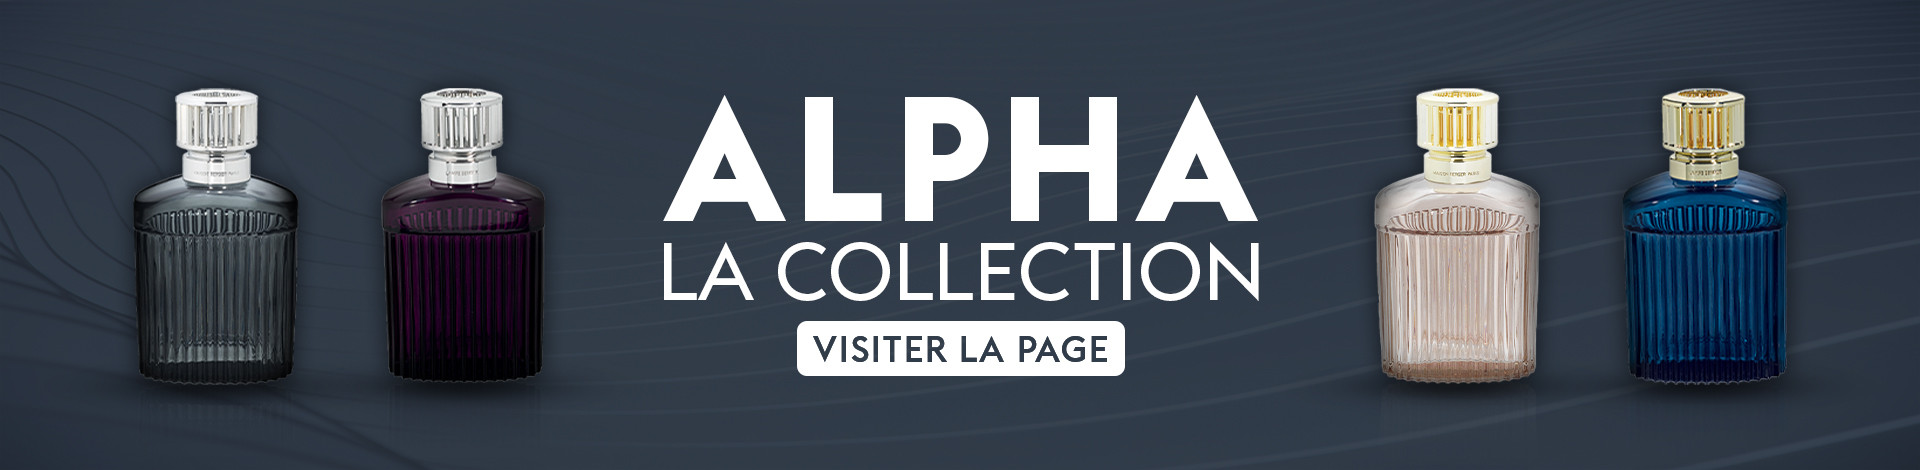 Alpha collection banner